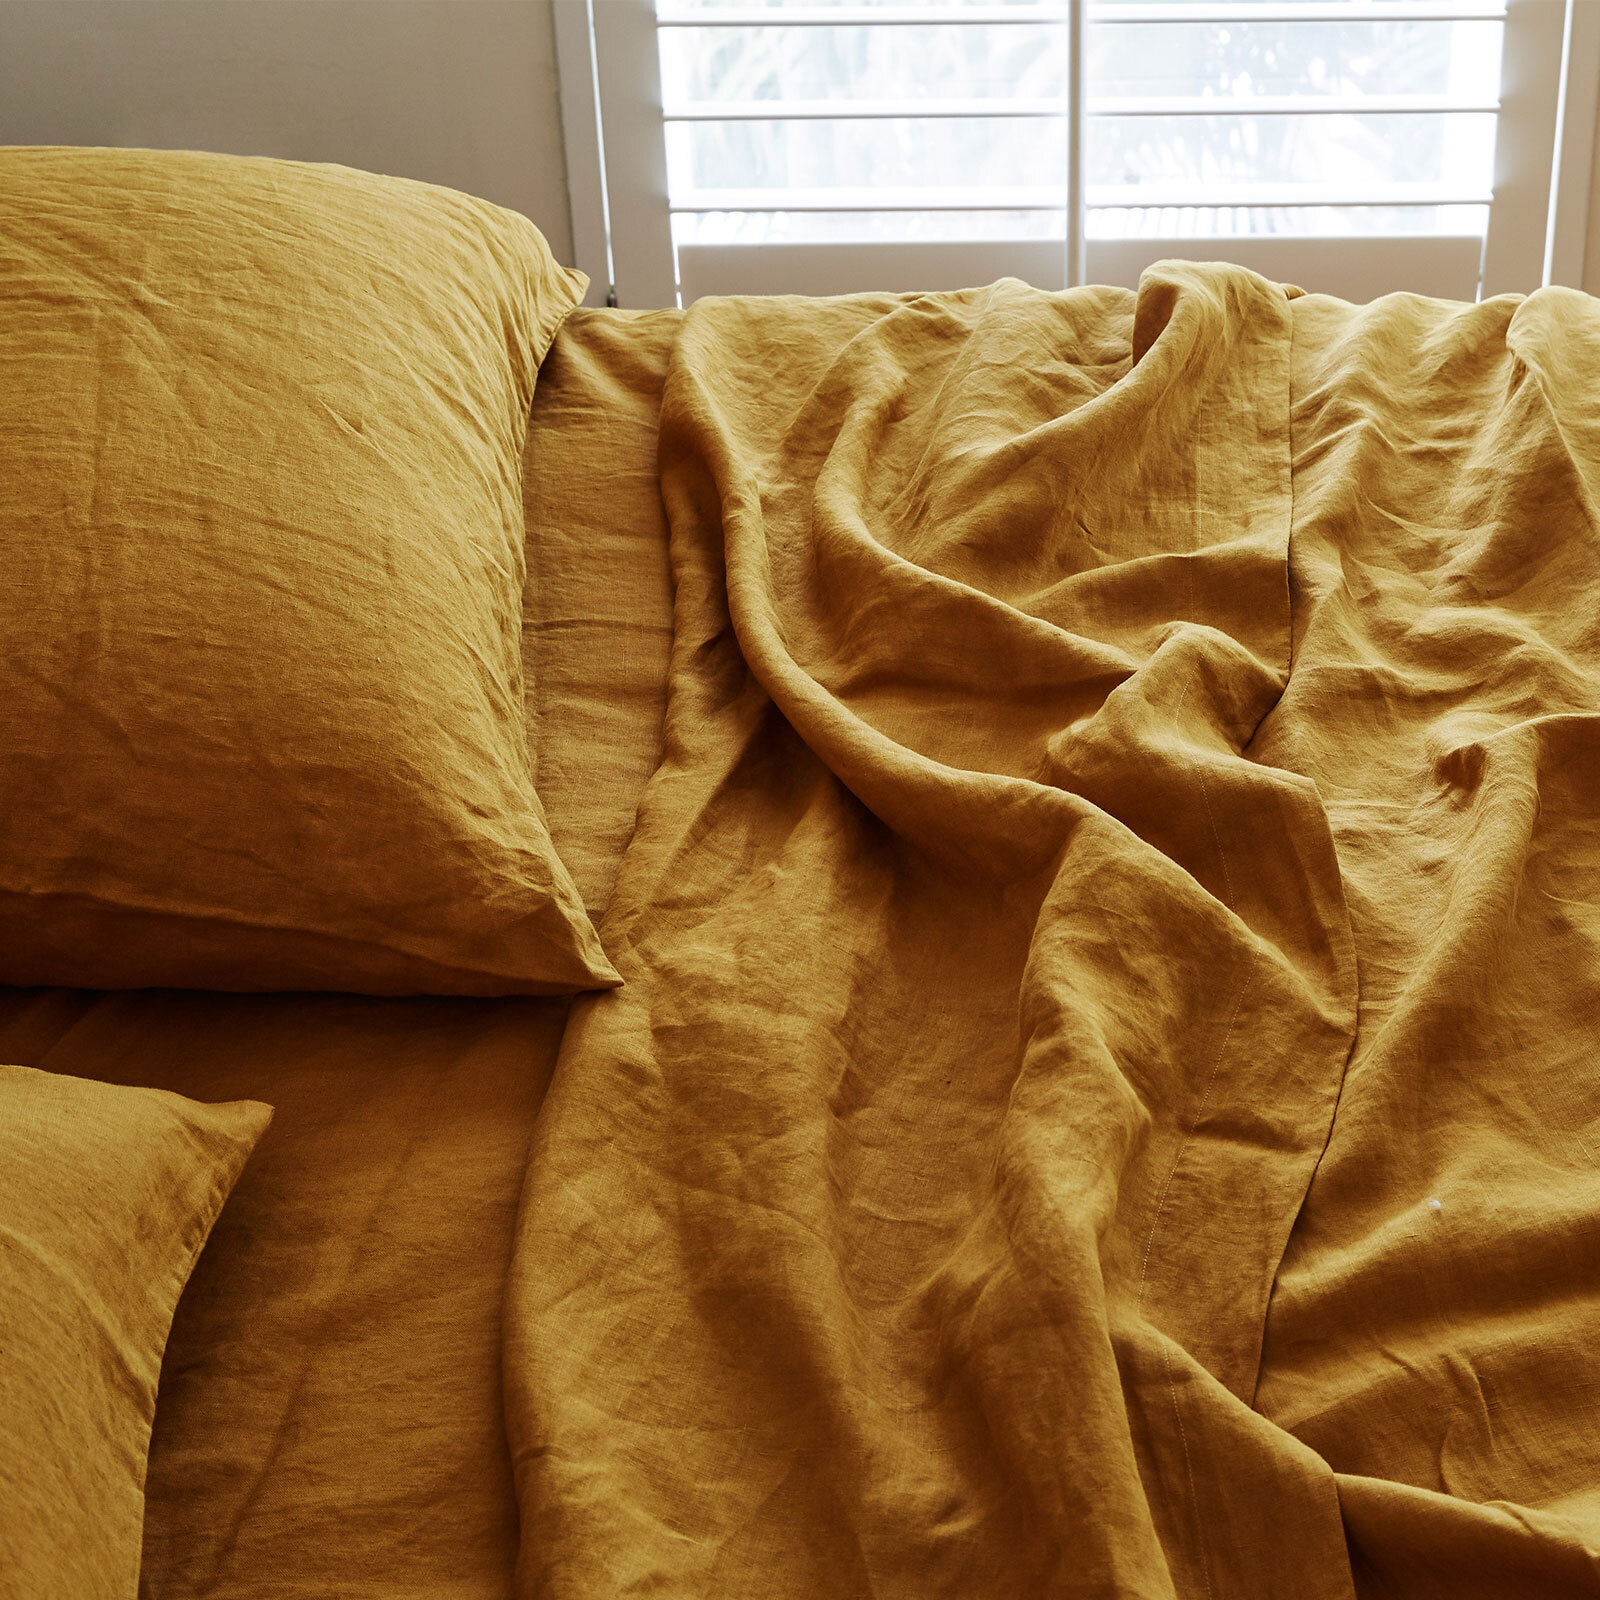 French linen Fitted Sheet in Mustard